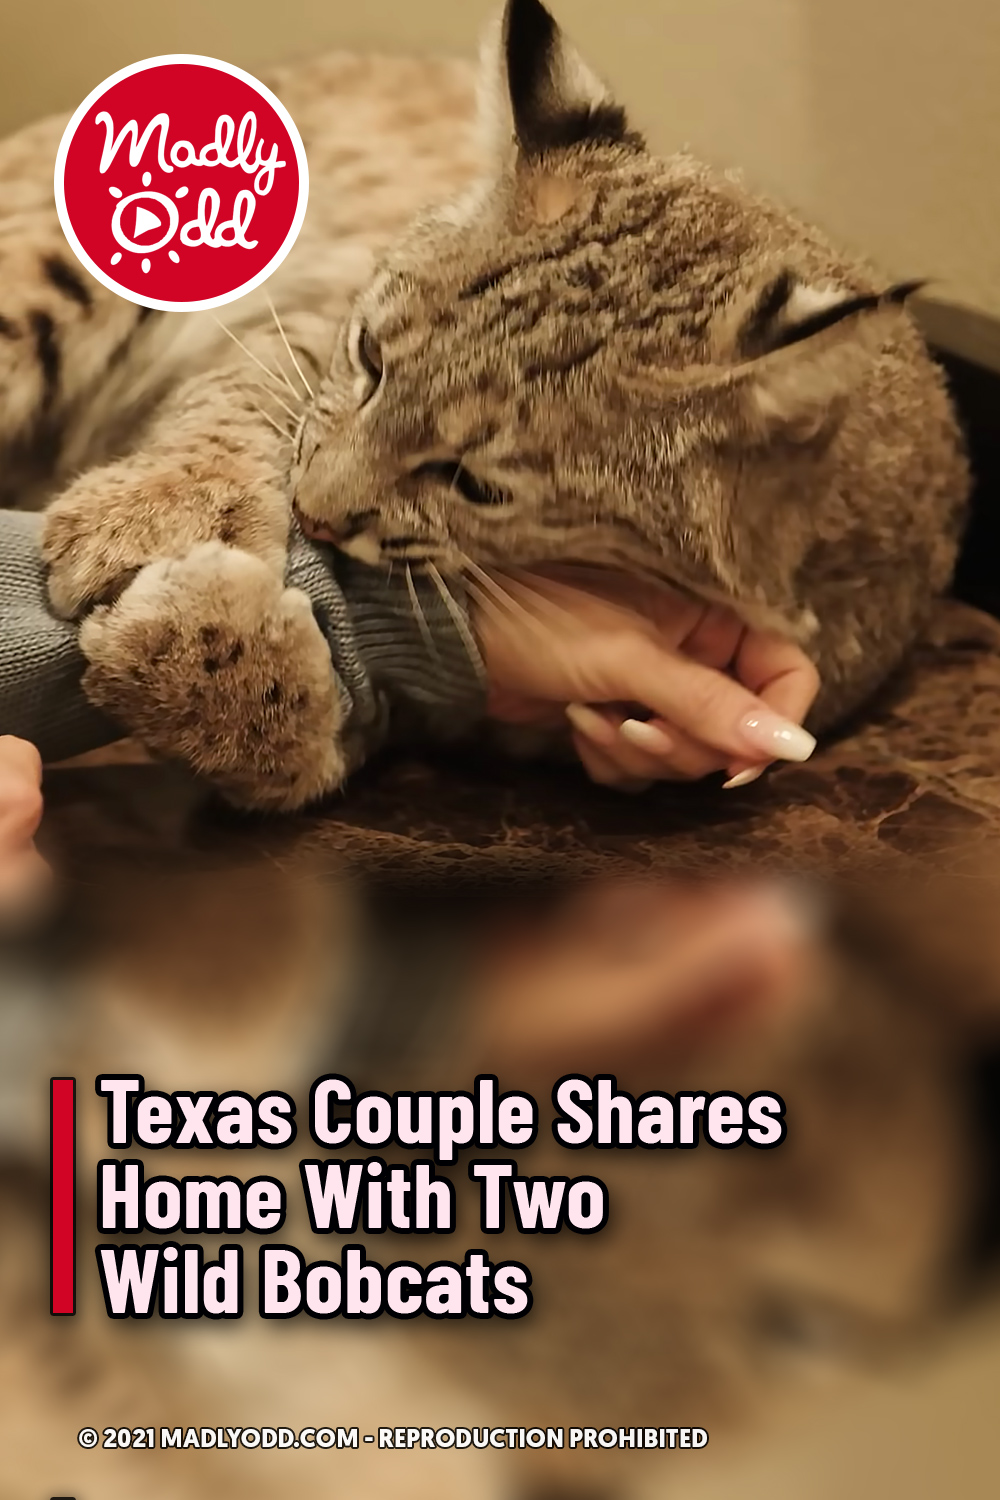 Texas Couple Shares Home With Two Wild Bobcats